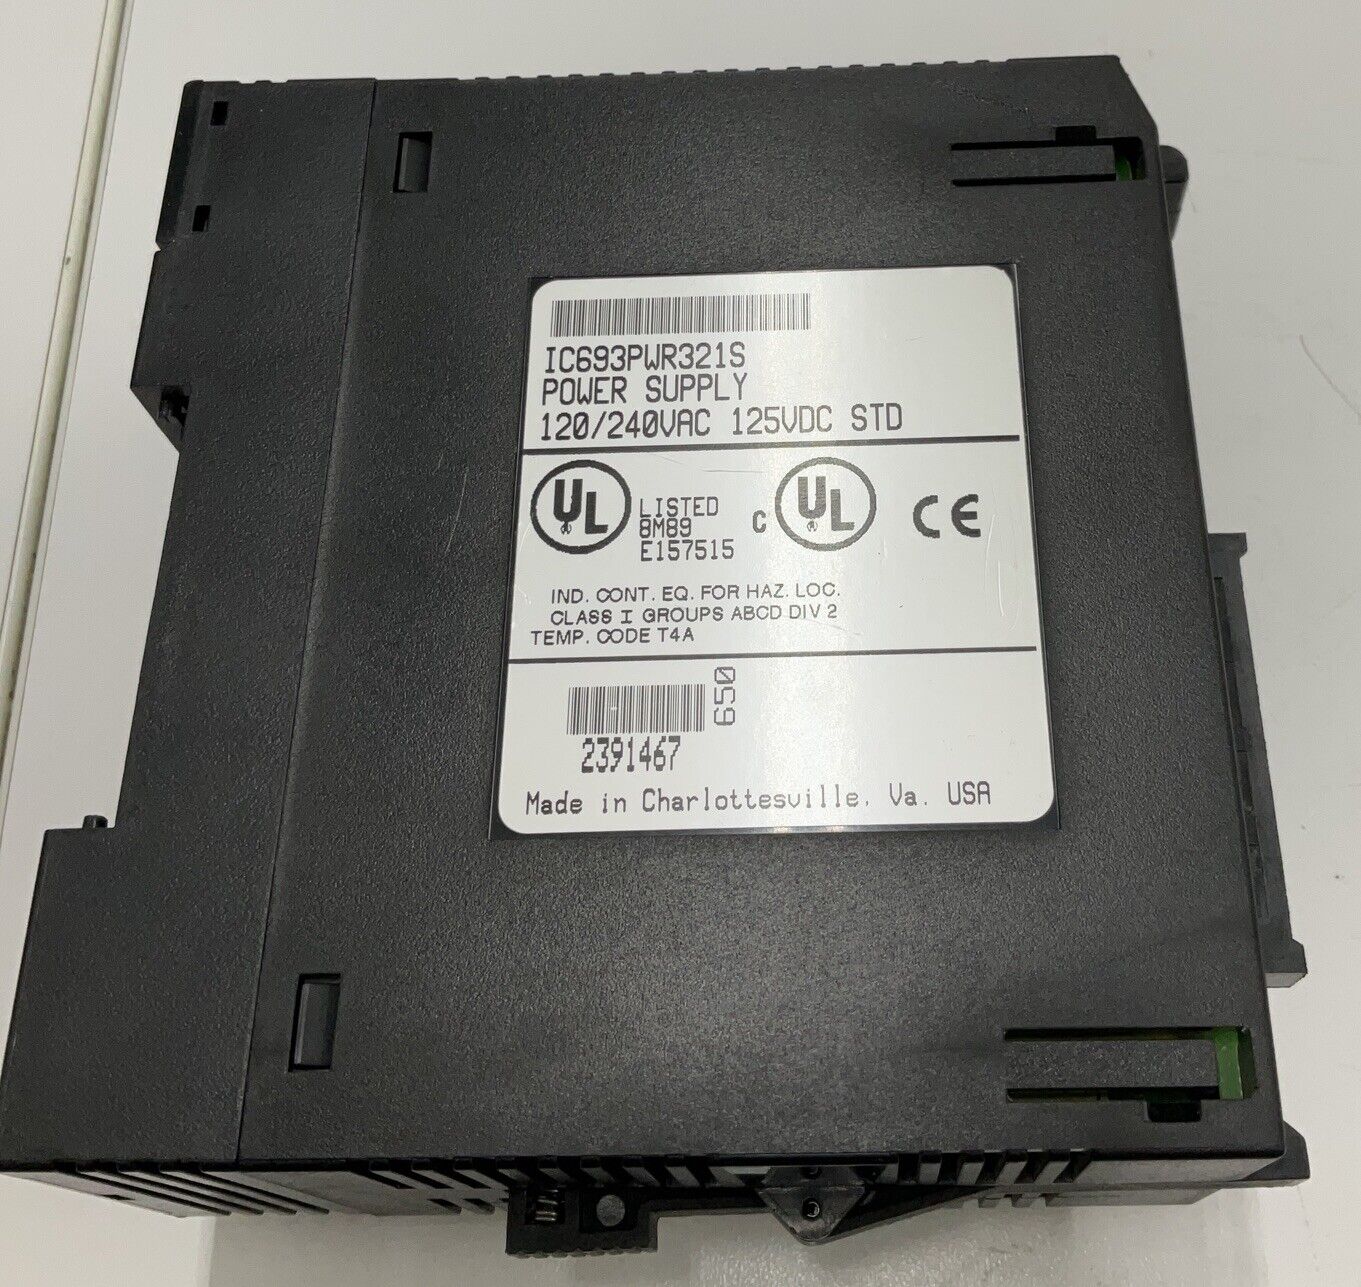 GE Fanuc IC693PWR321S Power Supply Series 90-30, 0.8A (BL115) - 0